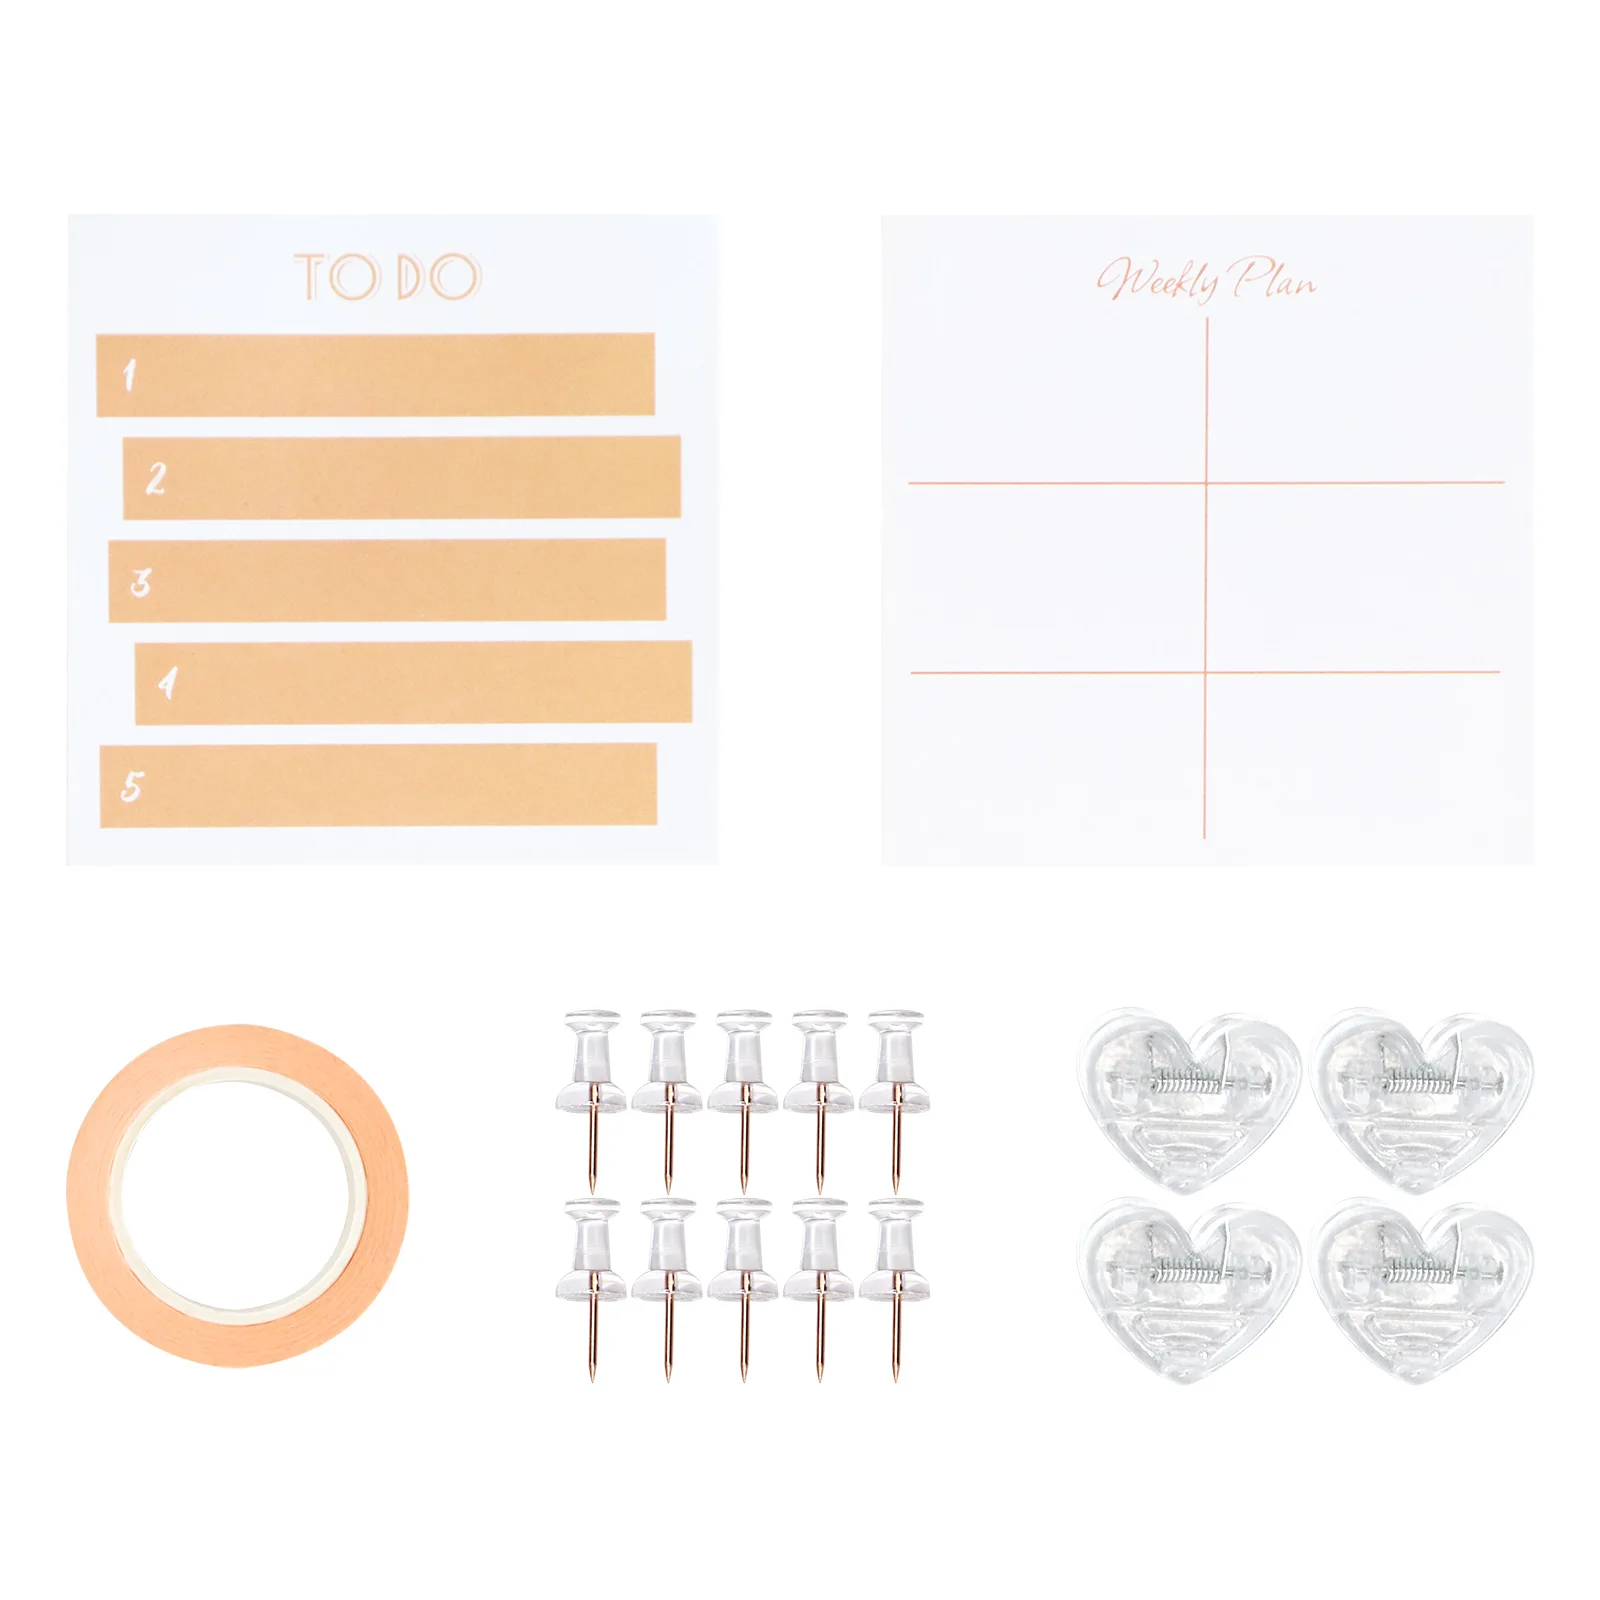 TO DO, WEEKLY PLAN Note Pad Ticket Holder Set Agenda Planning Document Organization And Storage Office Accessories Set